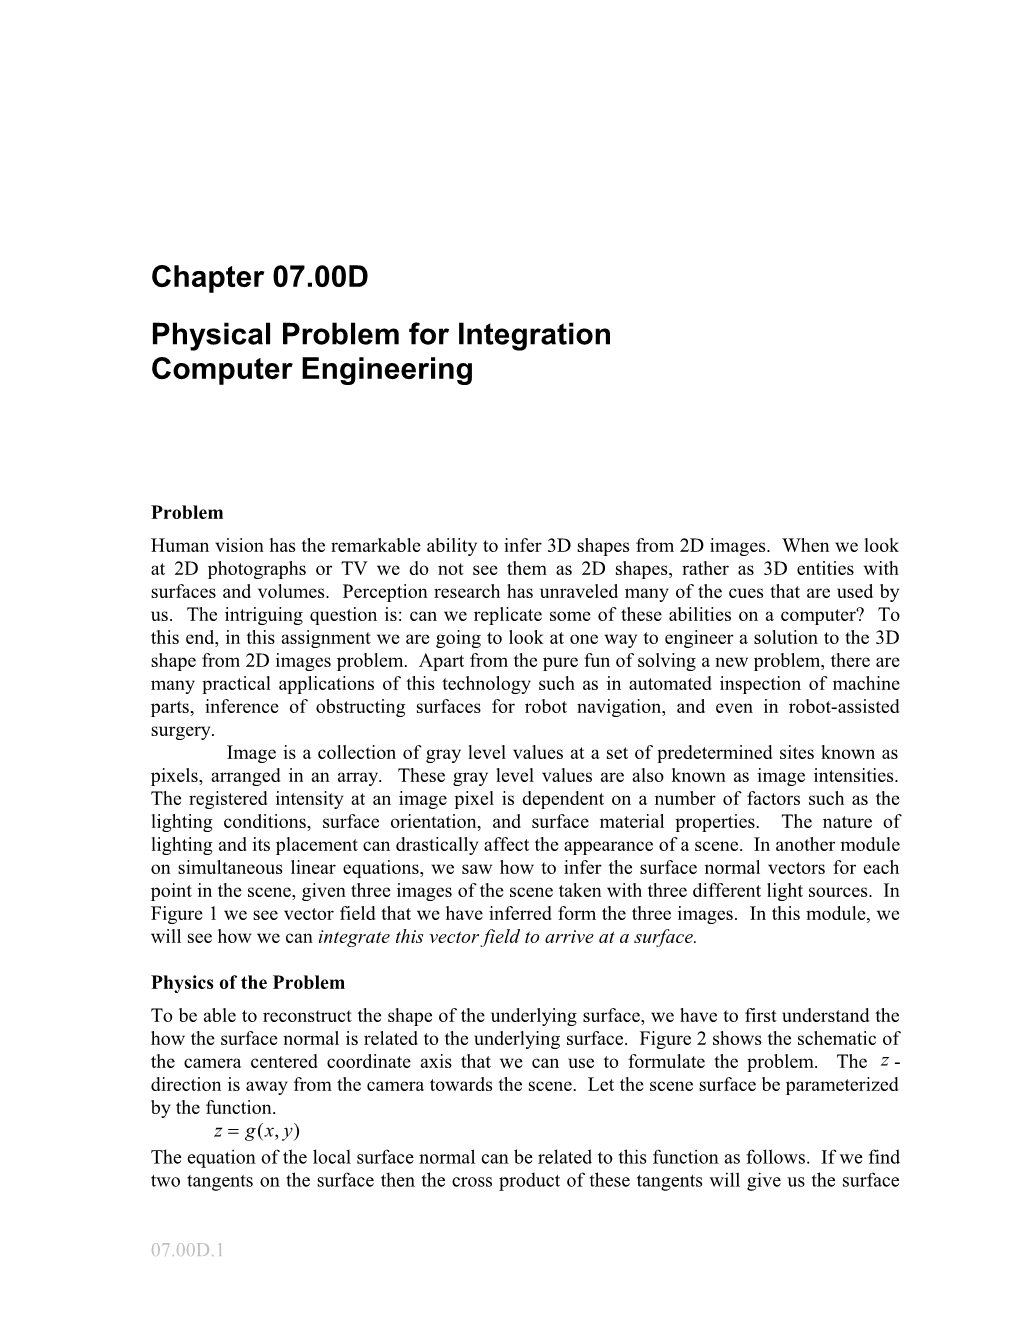 Physical Problem for Integration: Computer Engineering